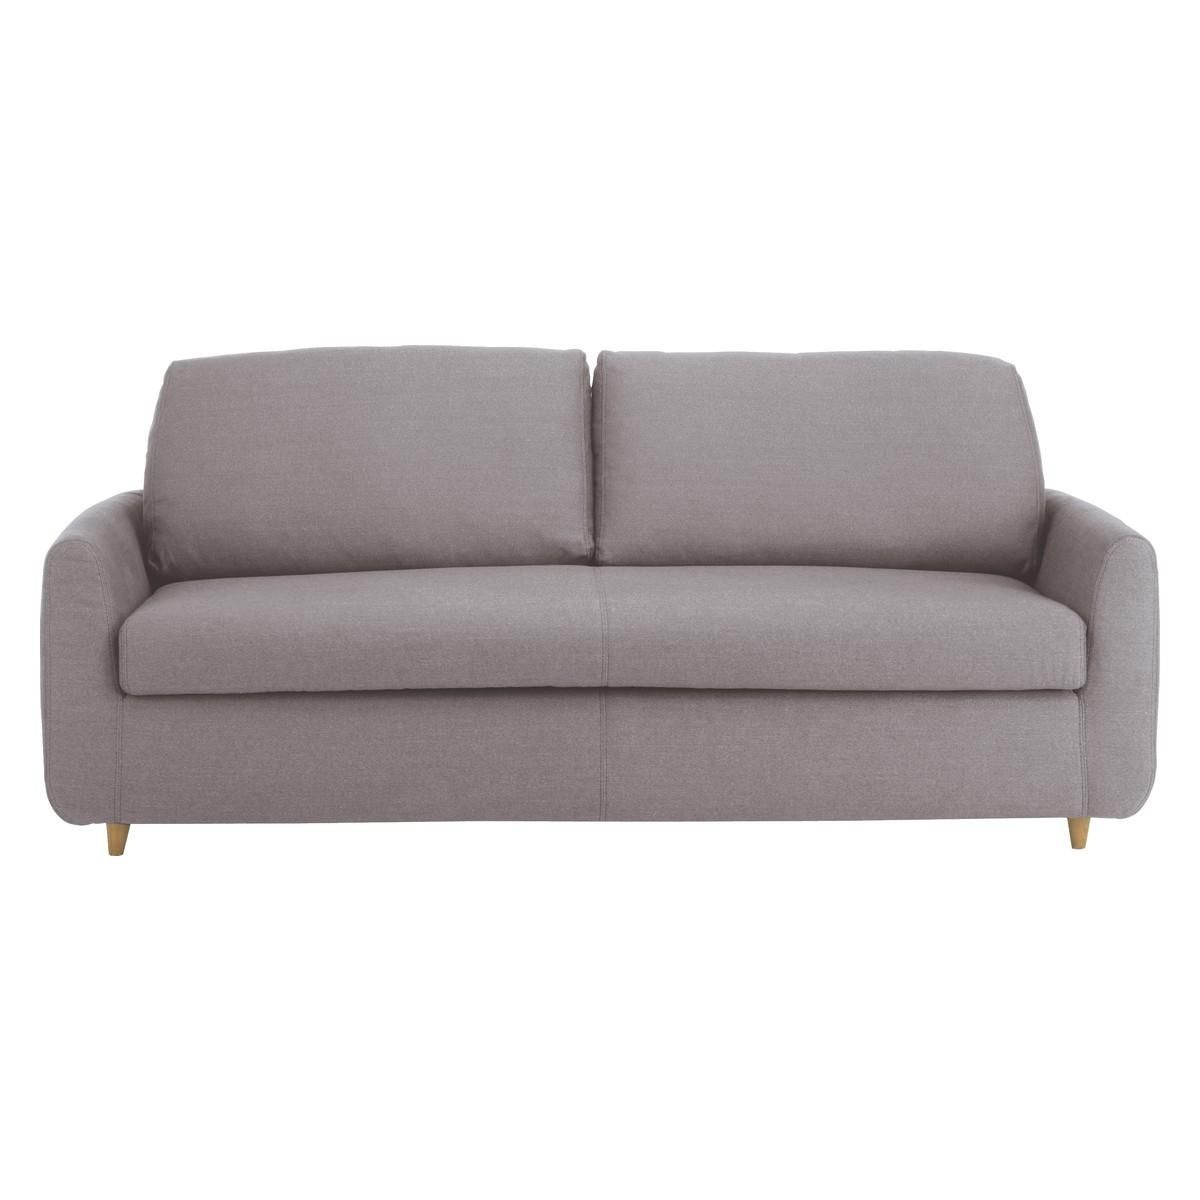 Trend 3 Seater Sofa Bed Sale 15 In Sectional Sofa Bed Canada With In 3 Seater Sofas For Sale (View 12 of 21)